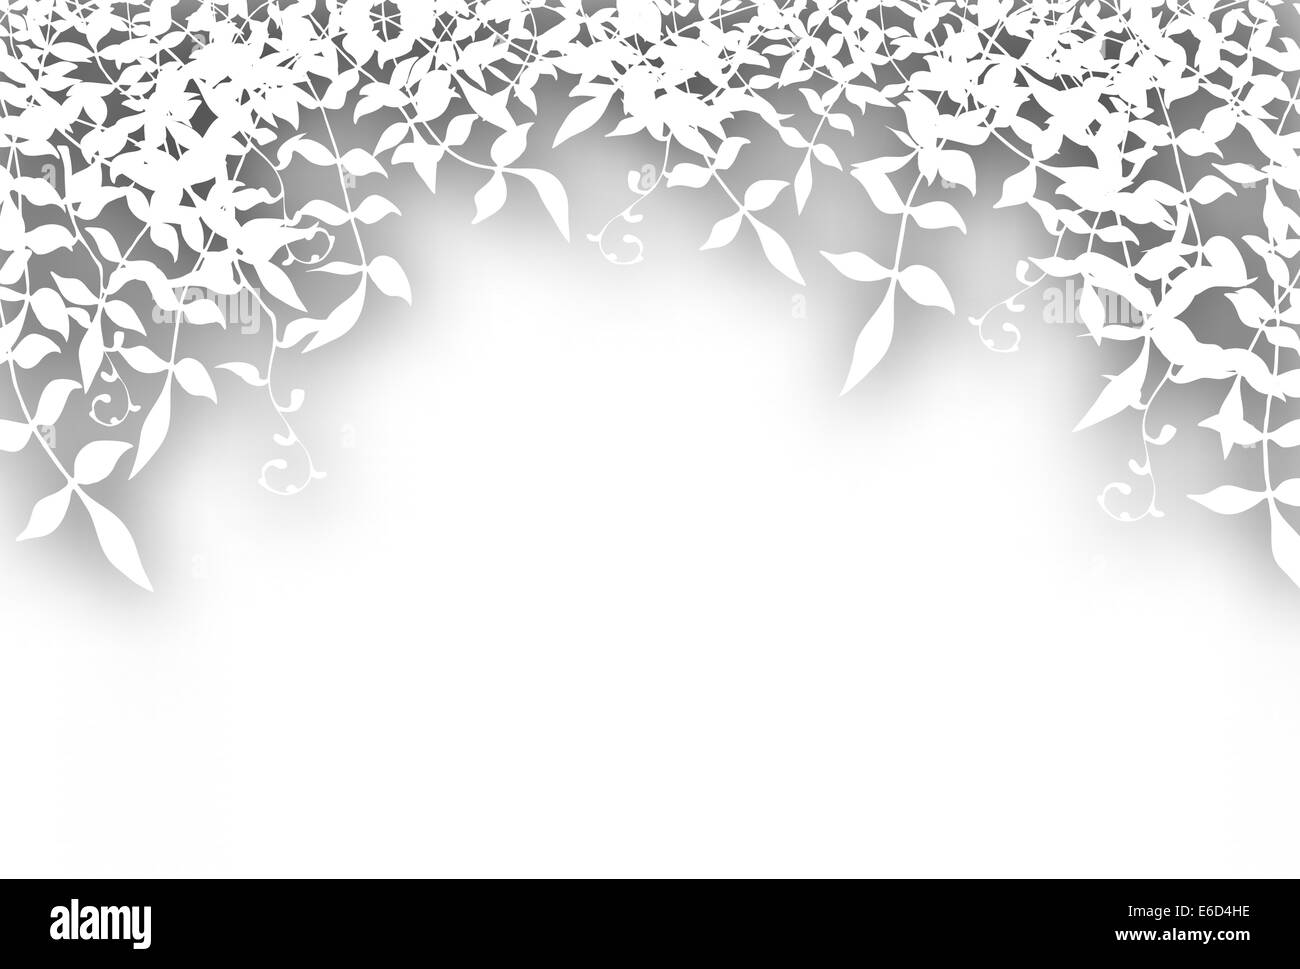 Editable vector illustration of bushy white foliage cutout with background shadow made using a gradient mesh Stock Vector